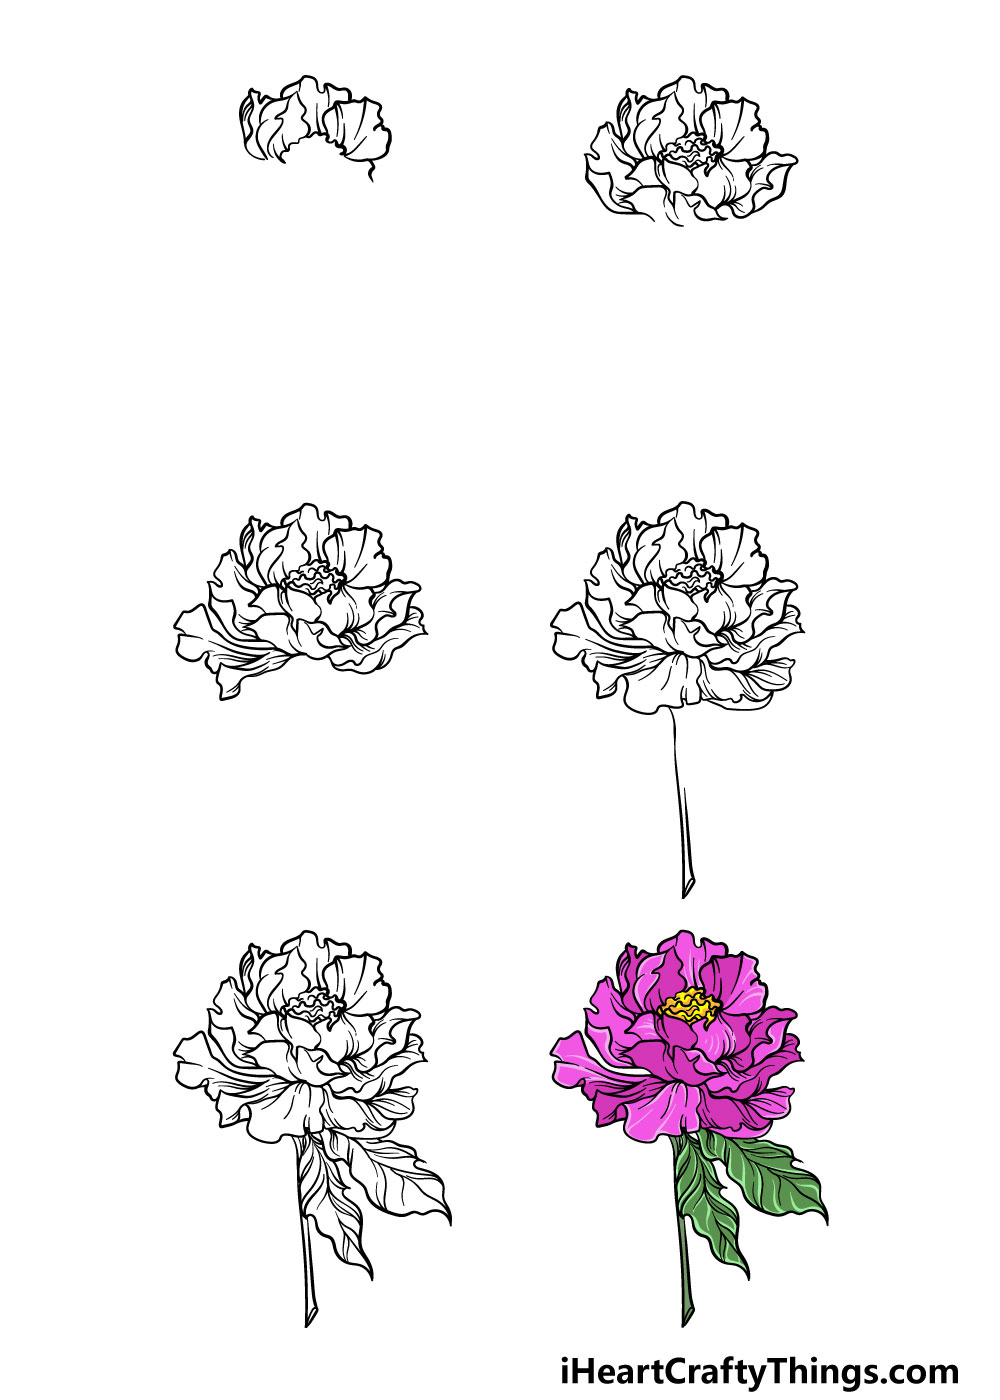 Vẽ 10 loại HOA LÁ ĐƠN GIẢN  How to draw 10 different flowers is very easy   YouTube